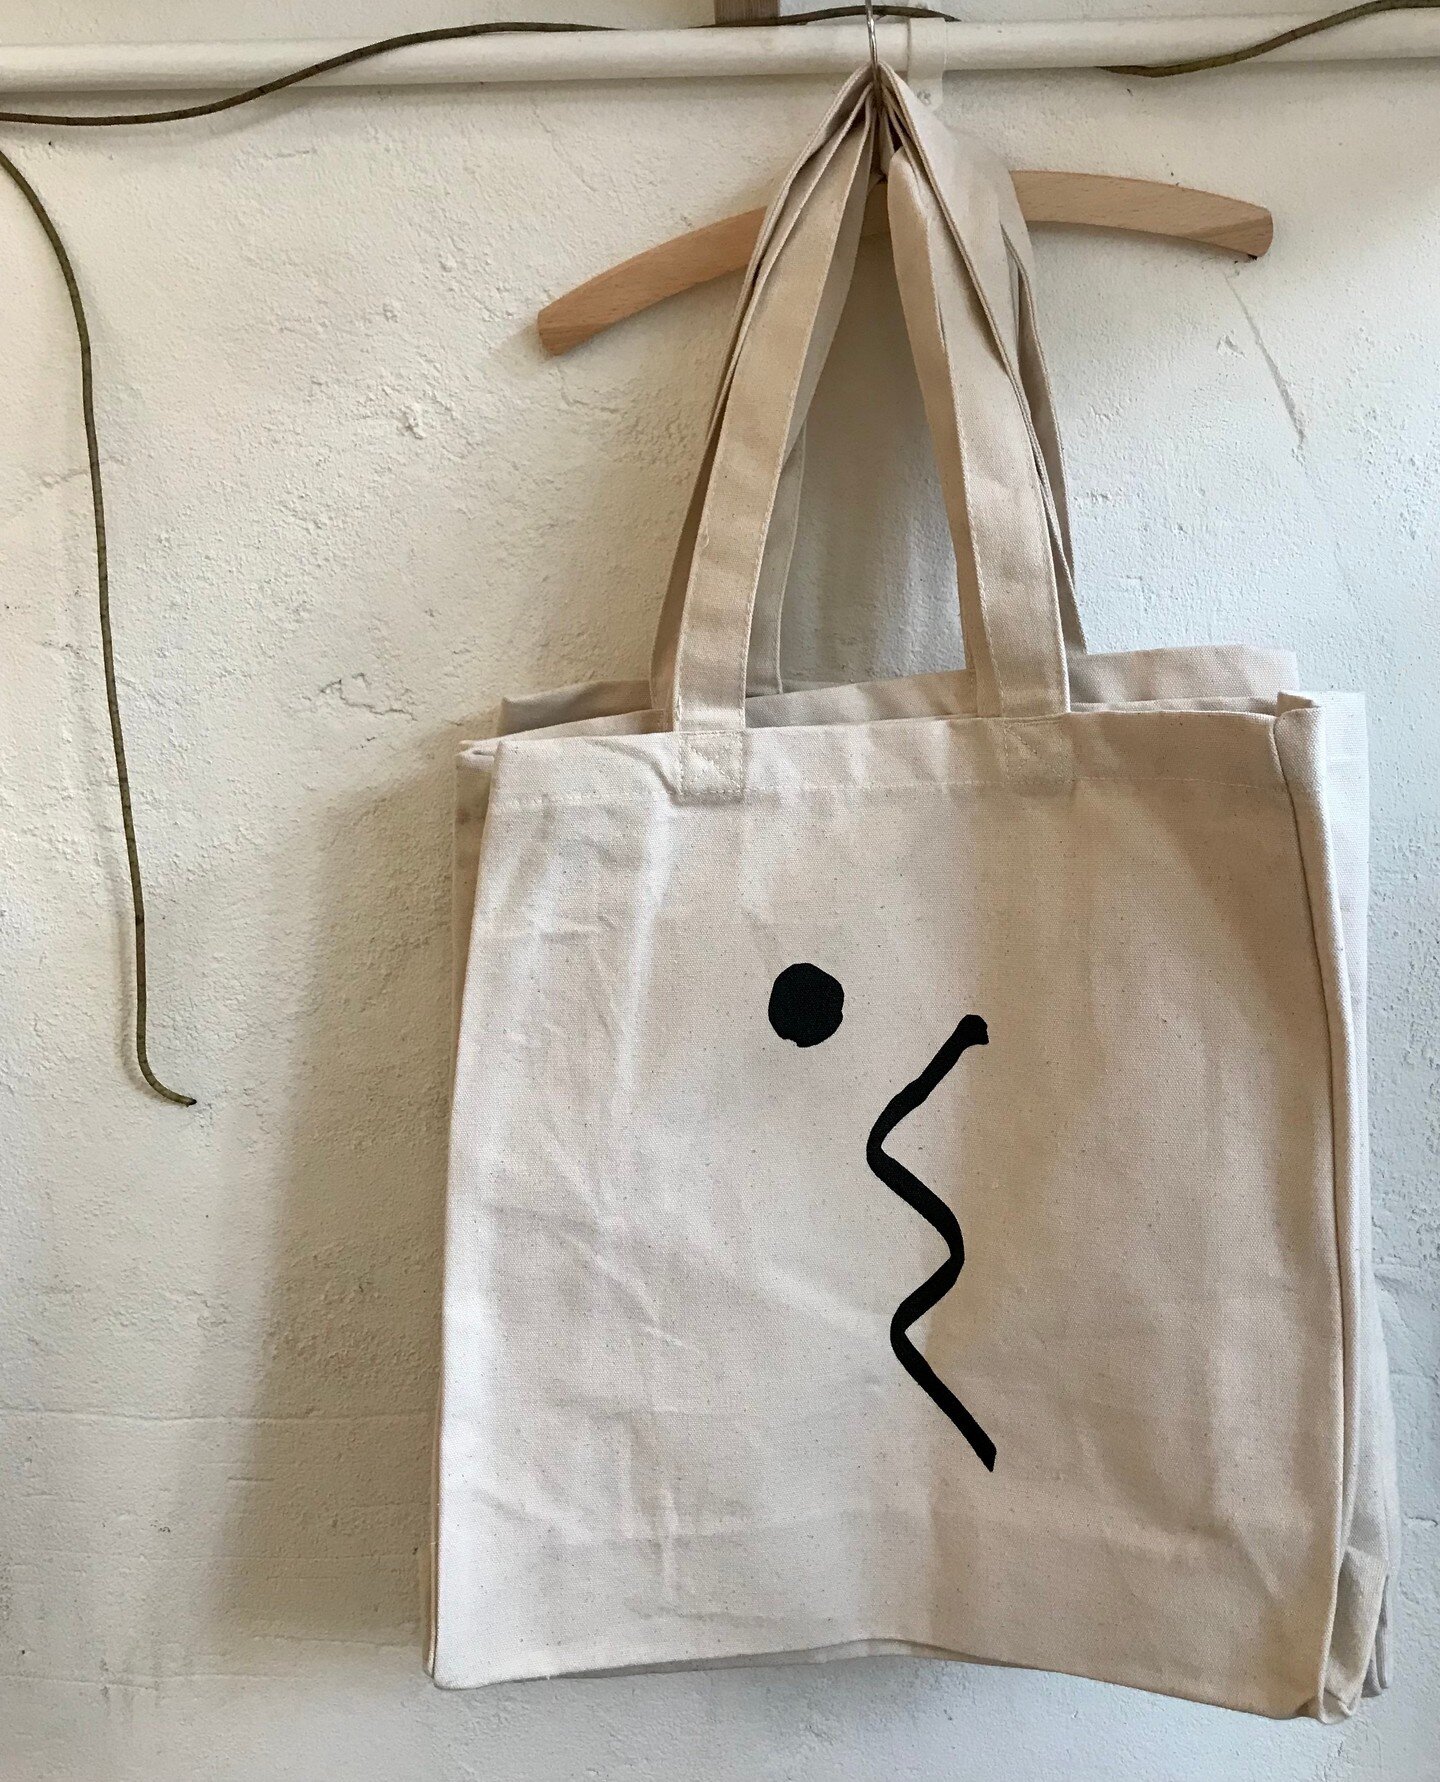 New Tote's online and in store. ⁠Thanks @theprinthaus for printing these for us!⁠
⁠
⁠
⁠
⁠